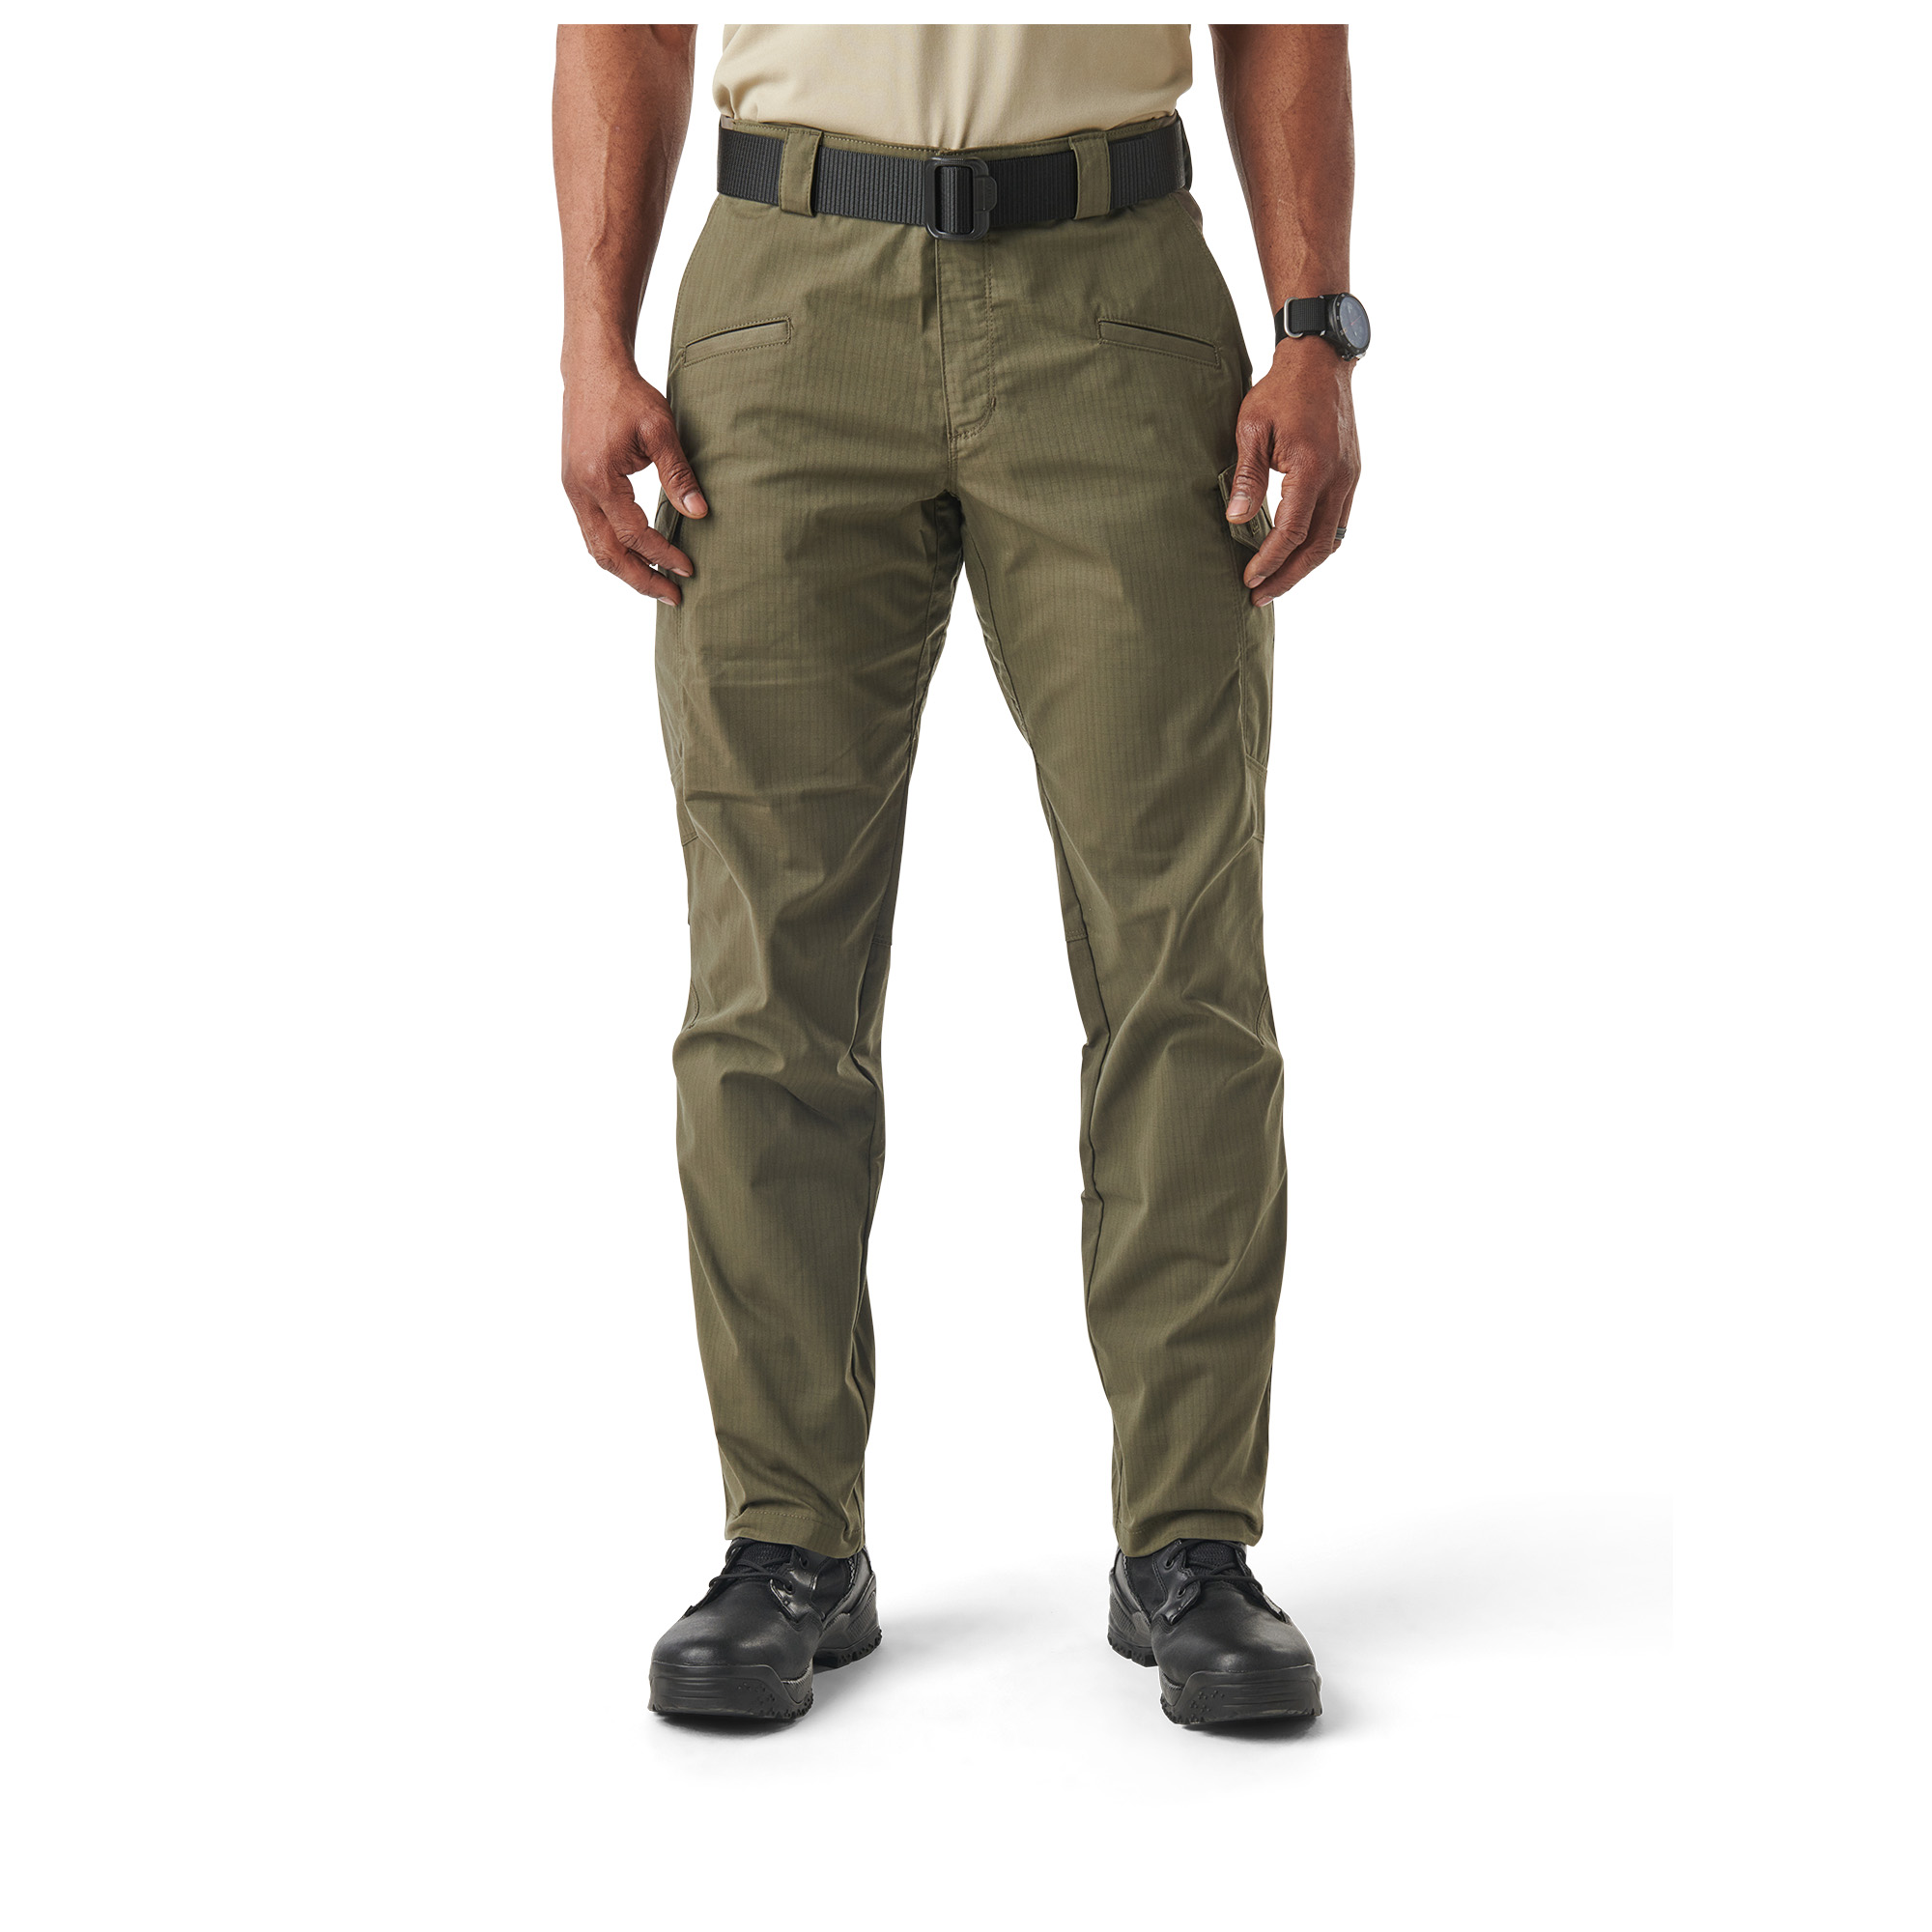 5.11 Tactical ICON PANT - RANGER GREEN